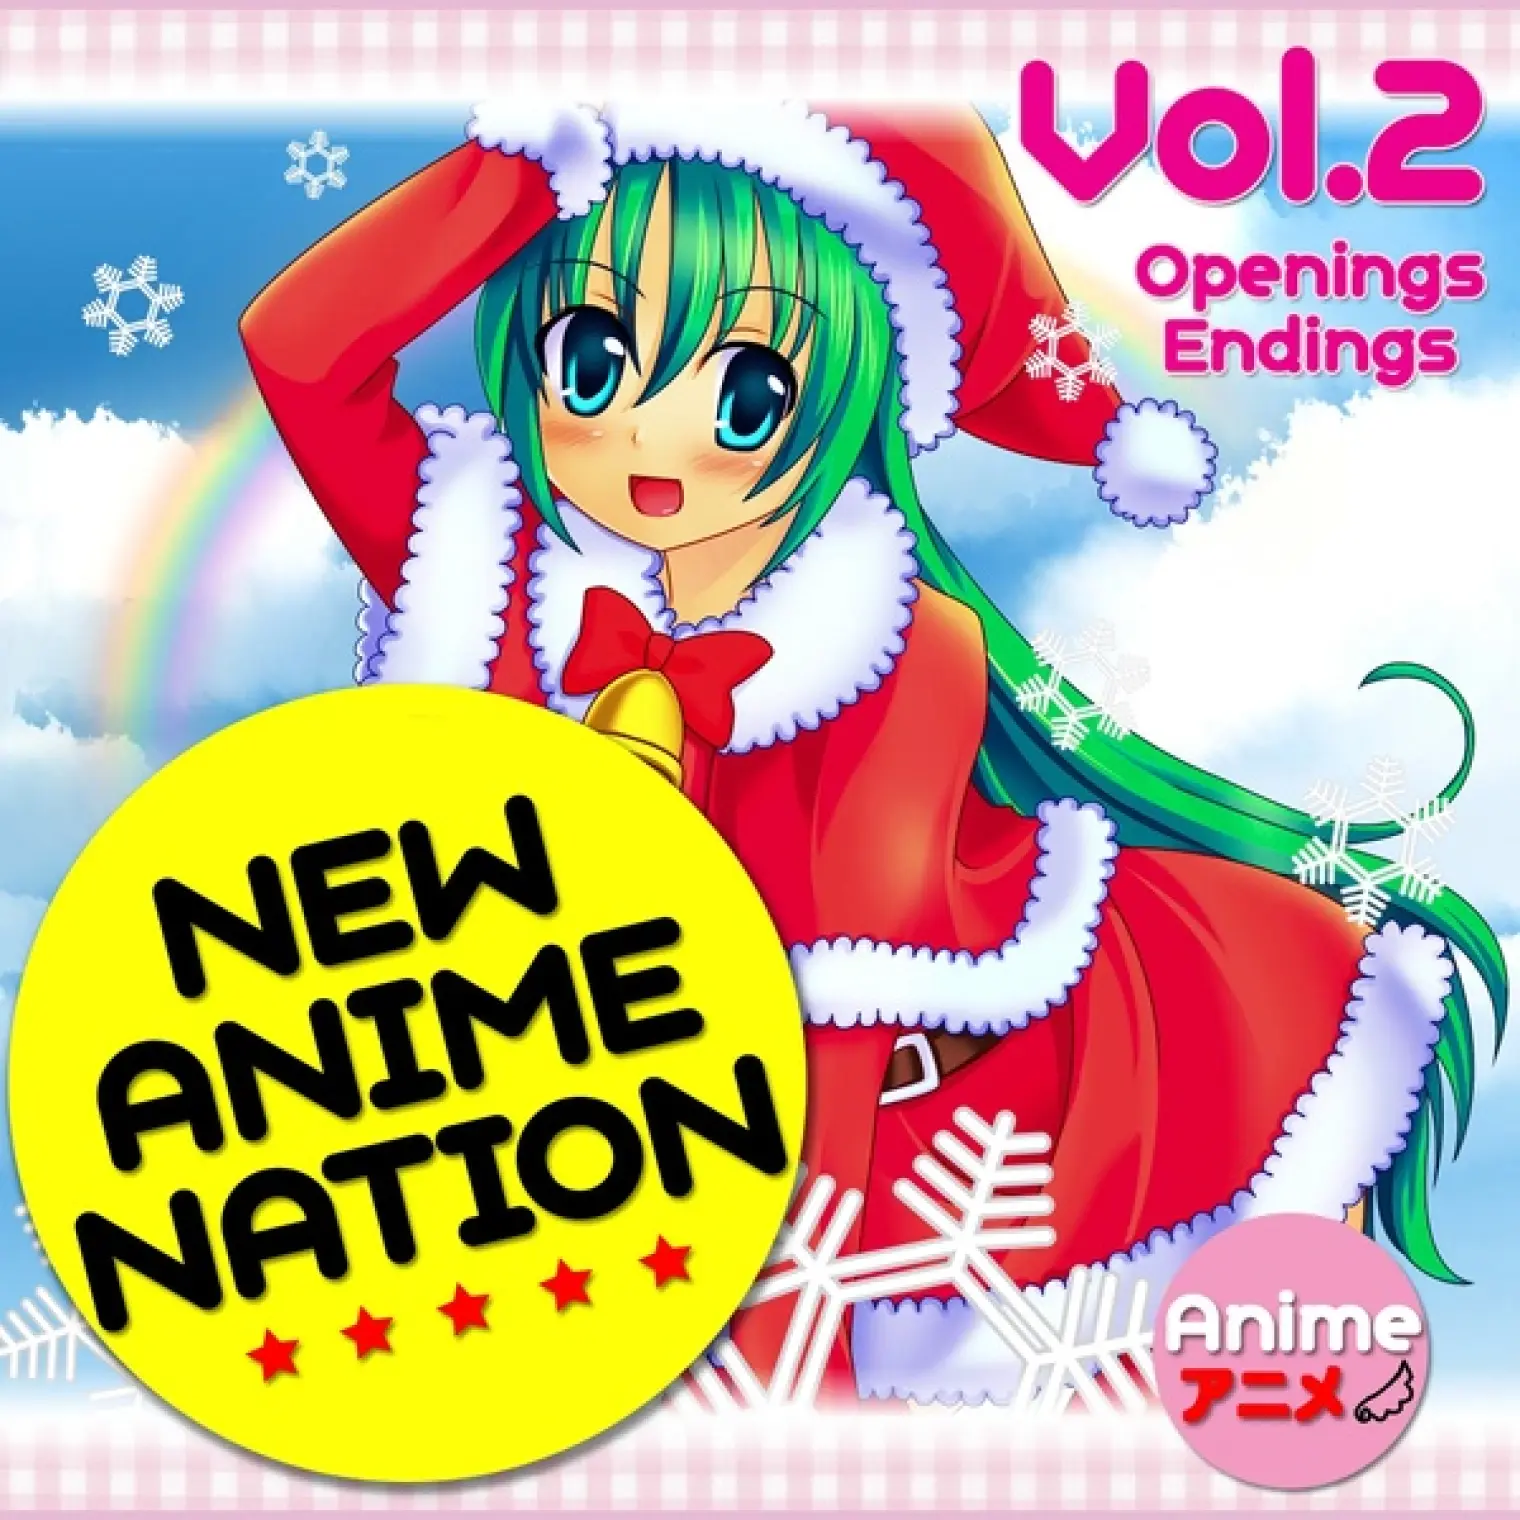 New anime nation (Openings and Endings, Vol. 2) -  RMaster 